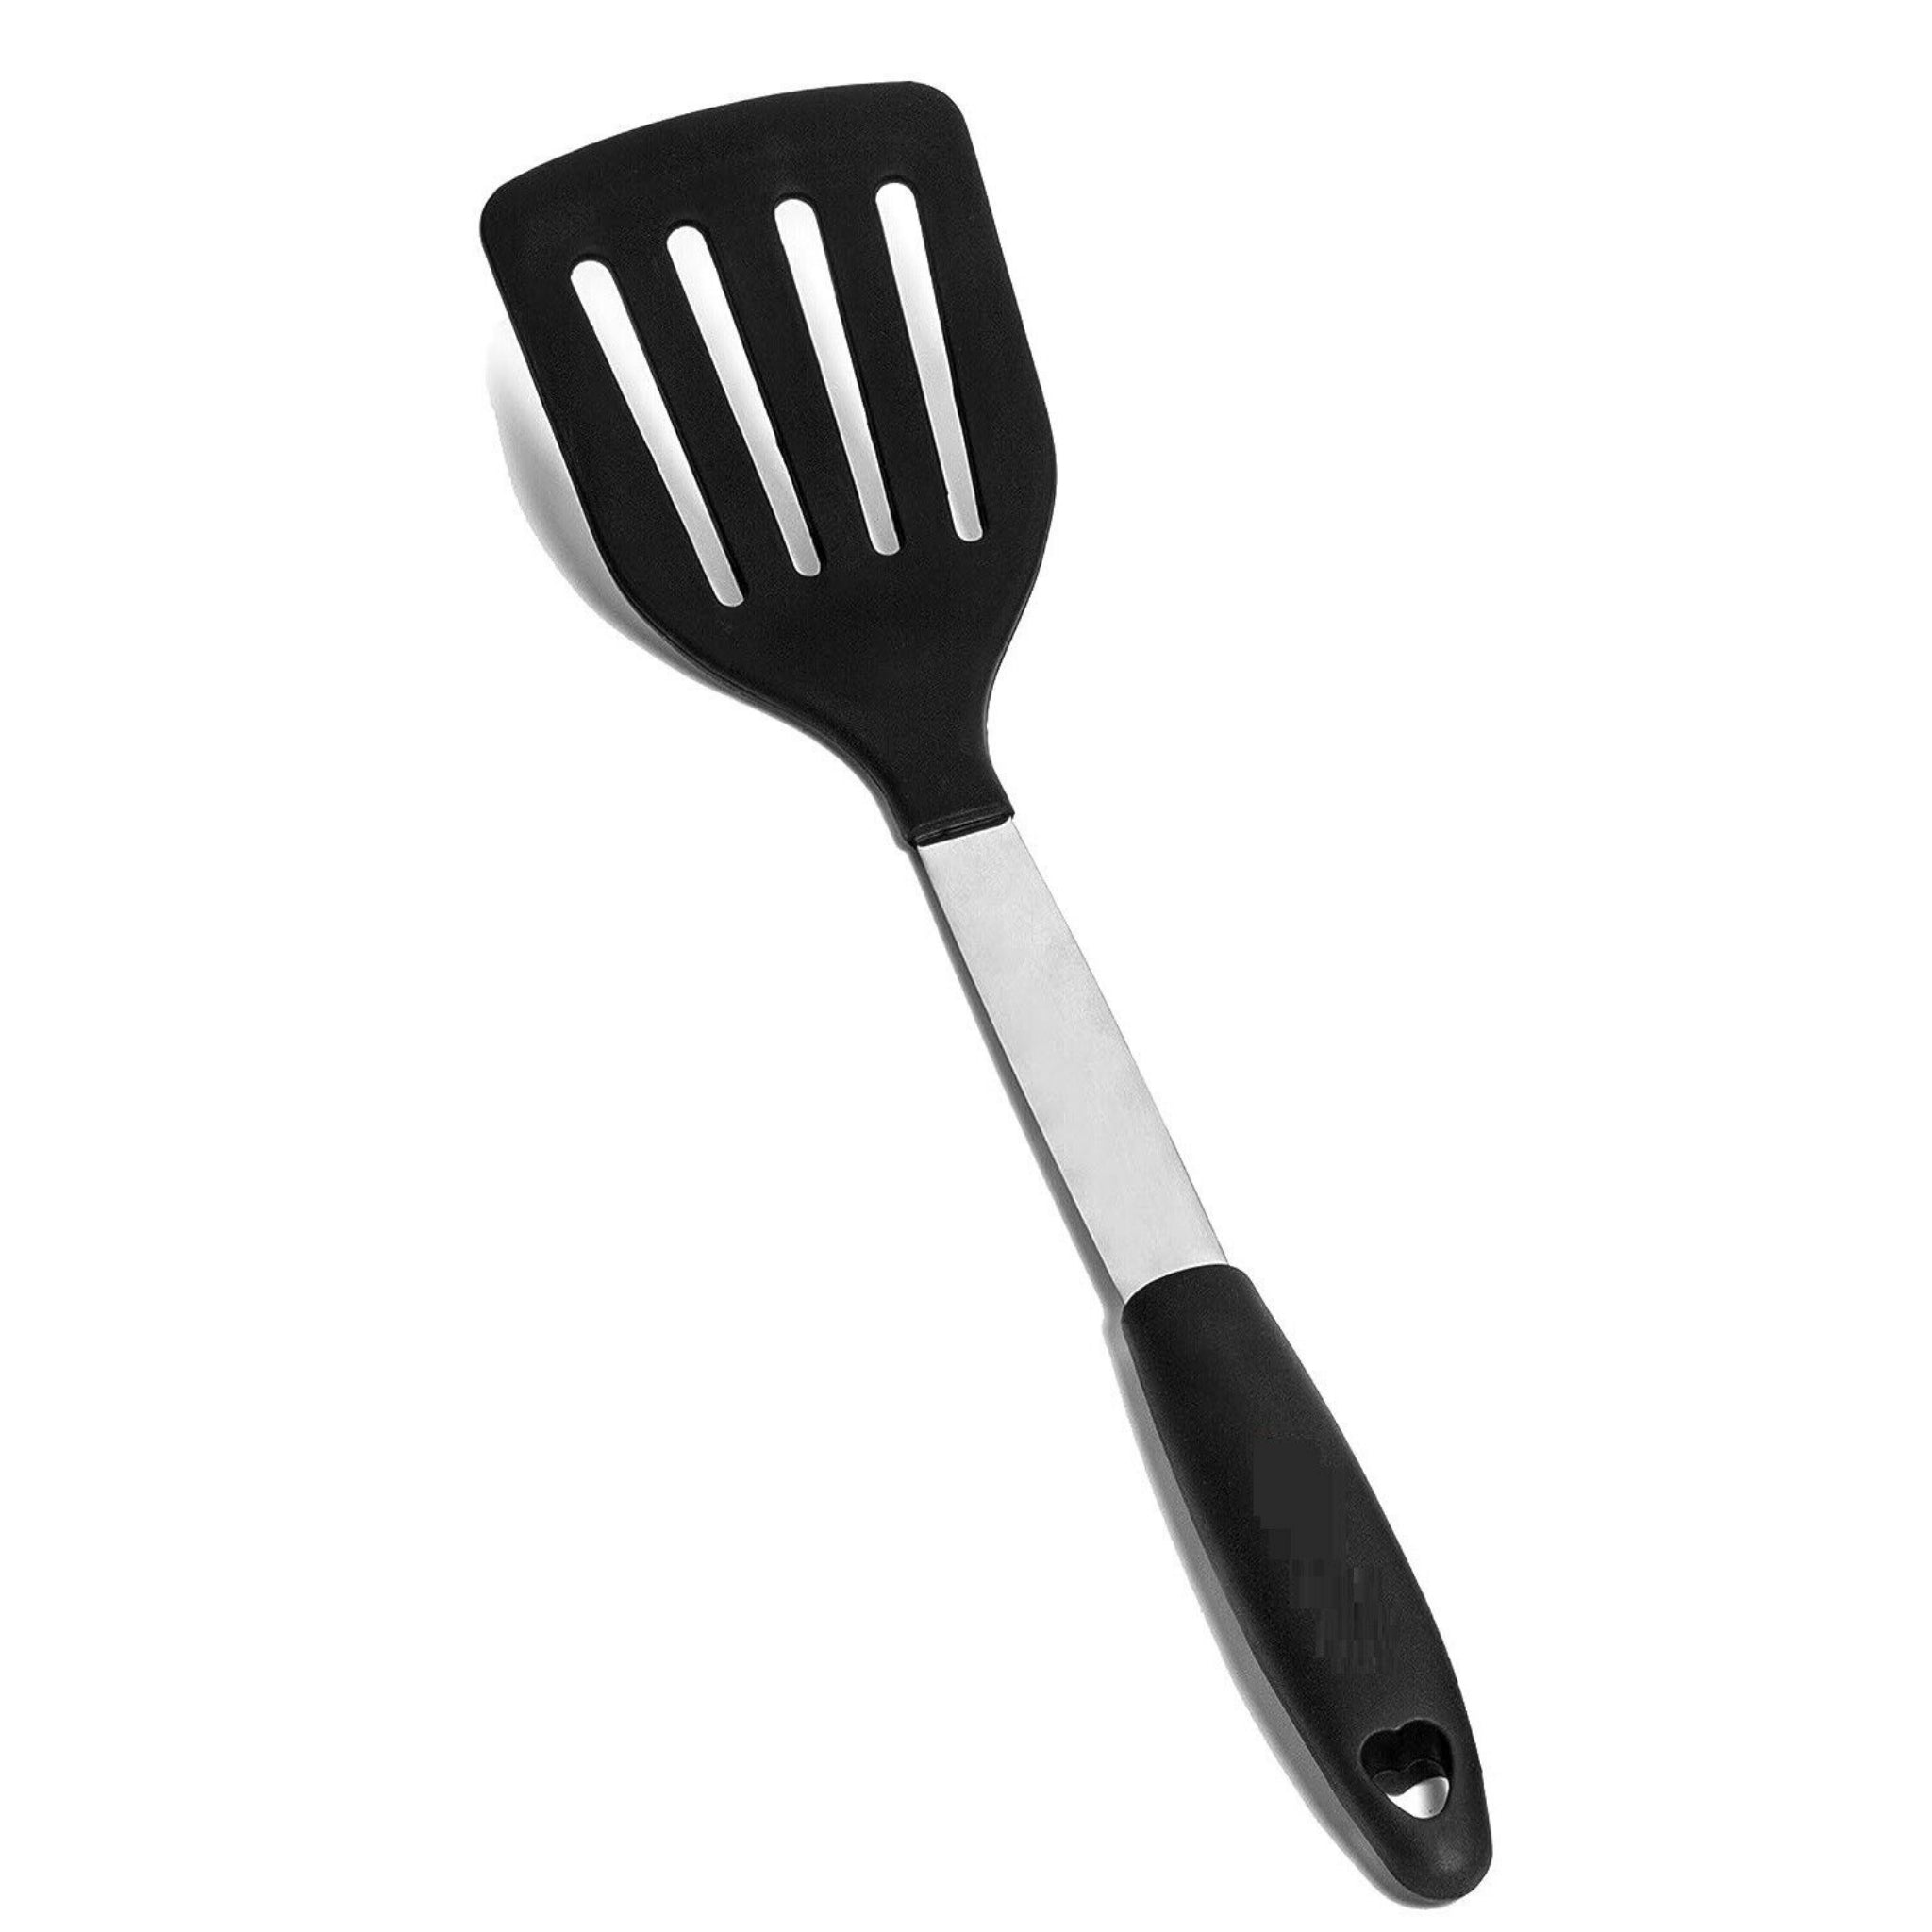 Beclen Harp 32cm Nylon Non Stick Solid And Slotted Turner/Flipper Heat Resistant Spatula-Perfect Kitchen/Cooking Companion Tool